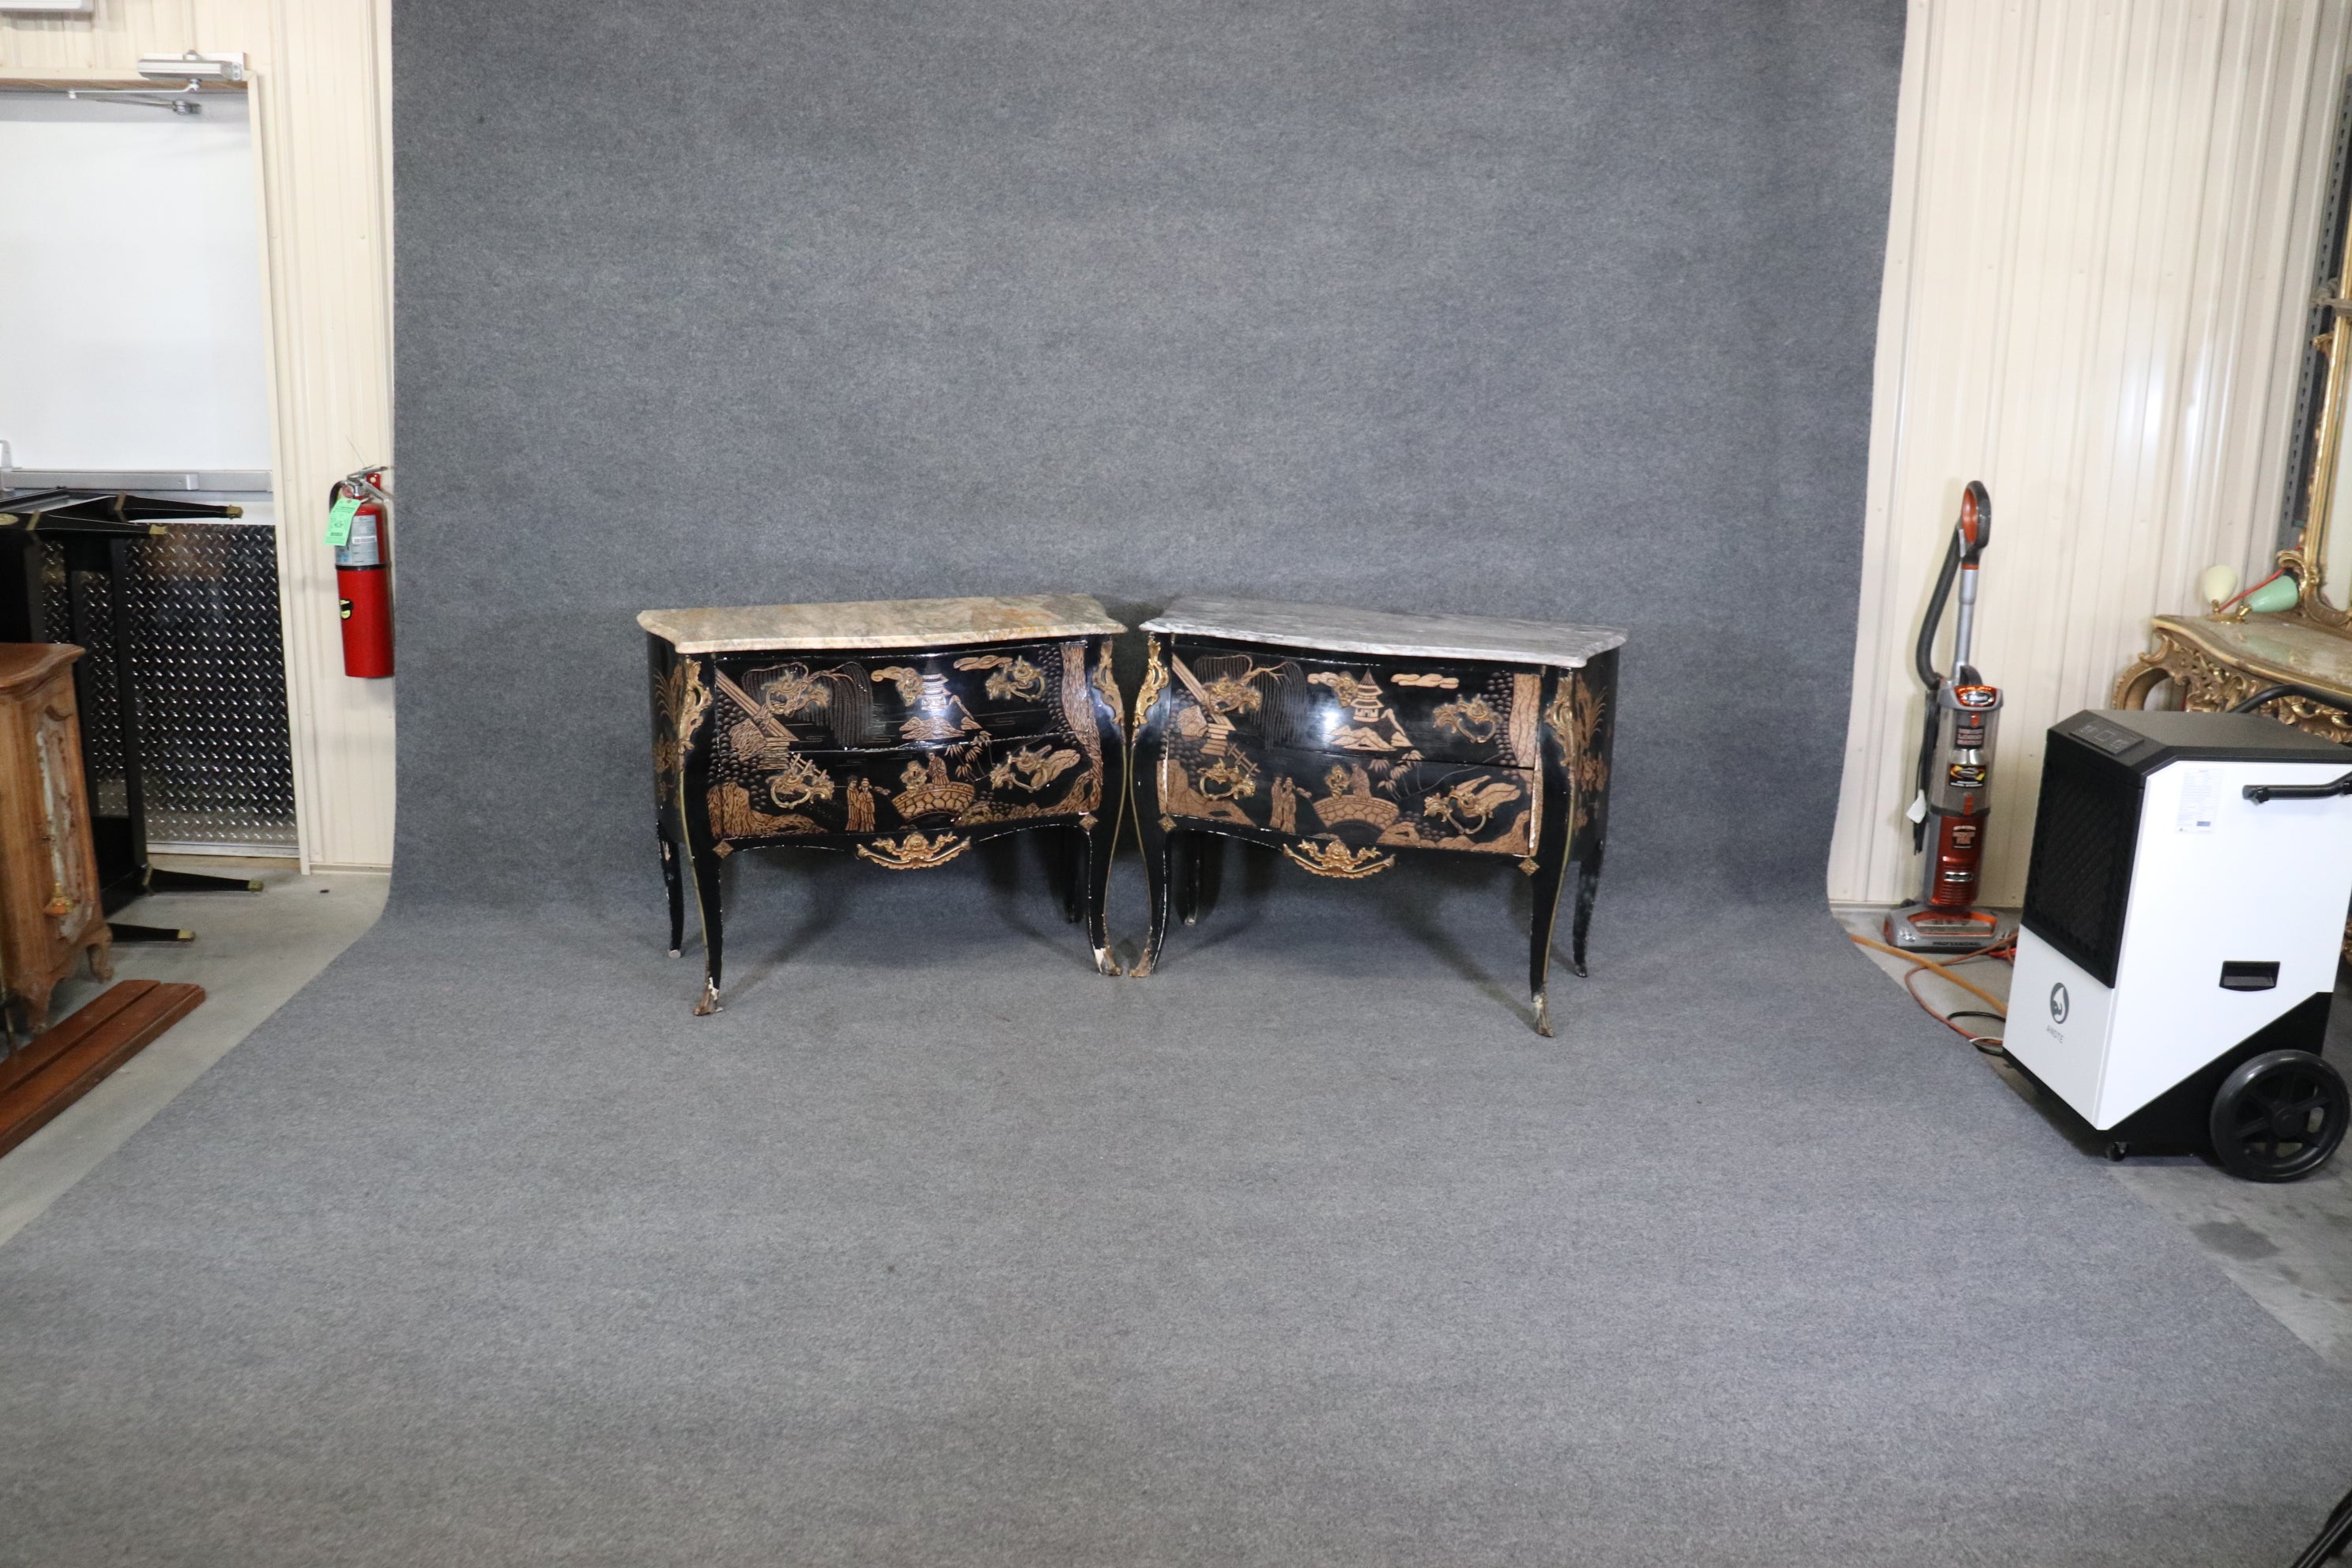 This is a rare pair of Coromandel carved lacquer commodes with their original time-worn finish and beautiful scenery. The cases match perfectly however the marble tops are of different species. Noth very noticable when spaced apart or in different